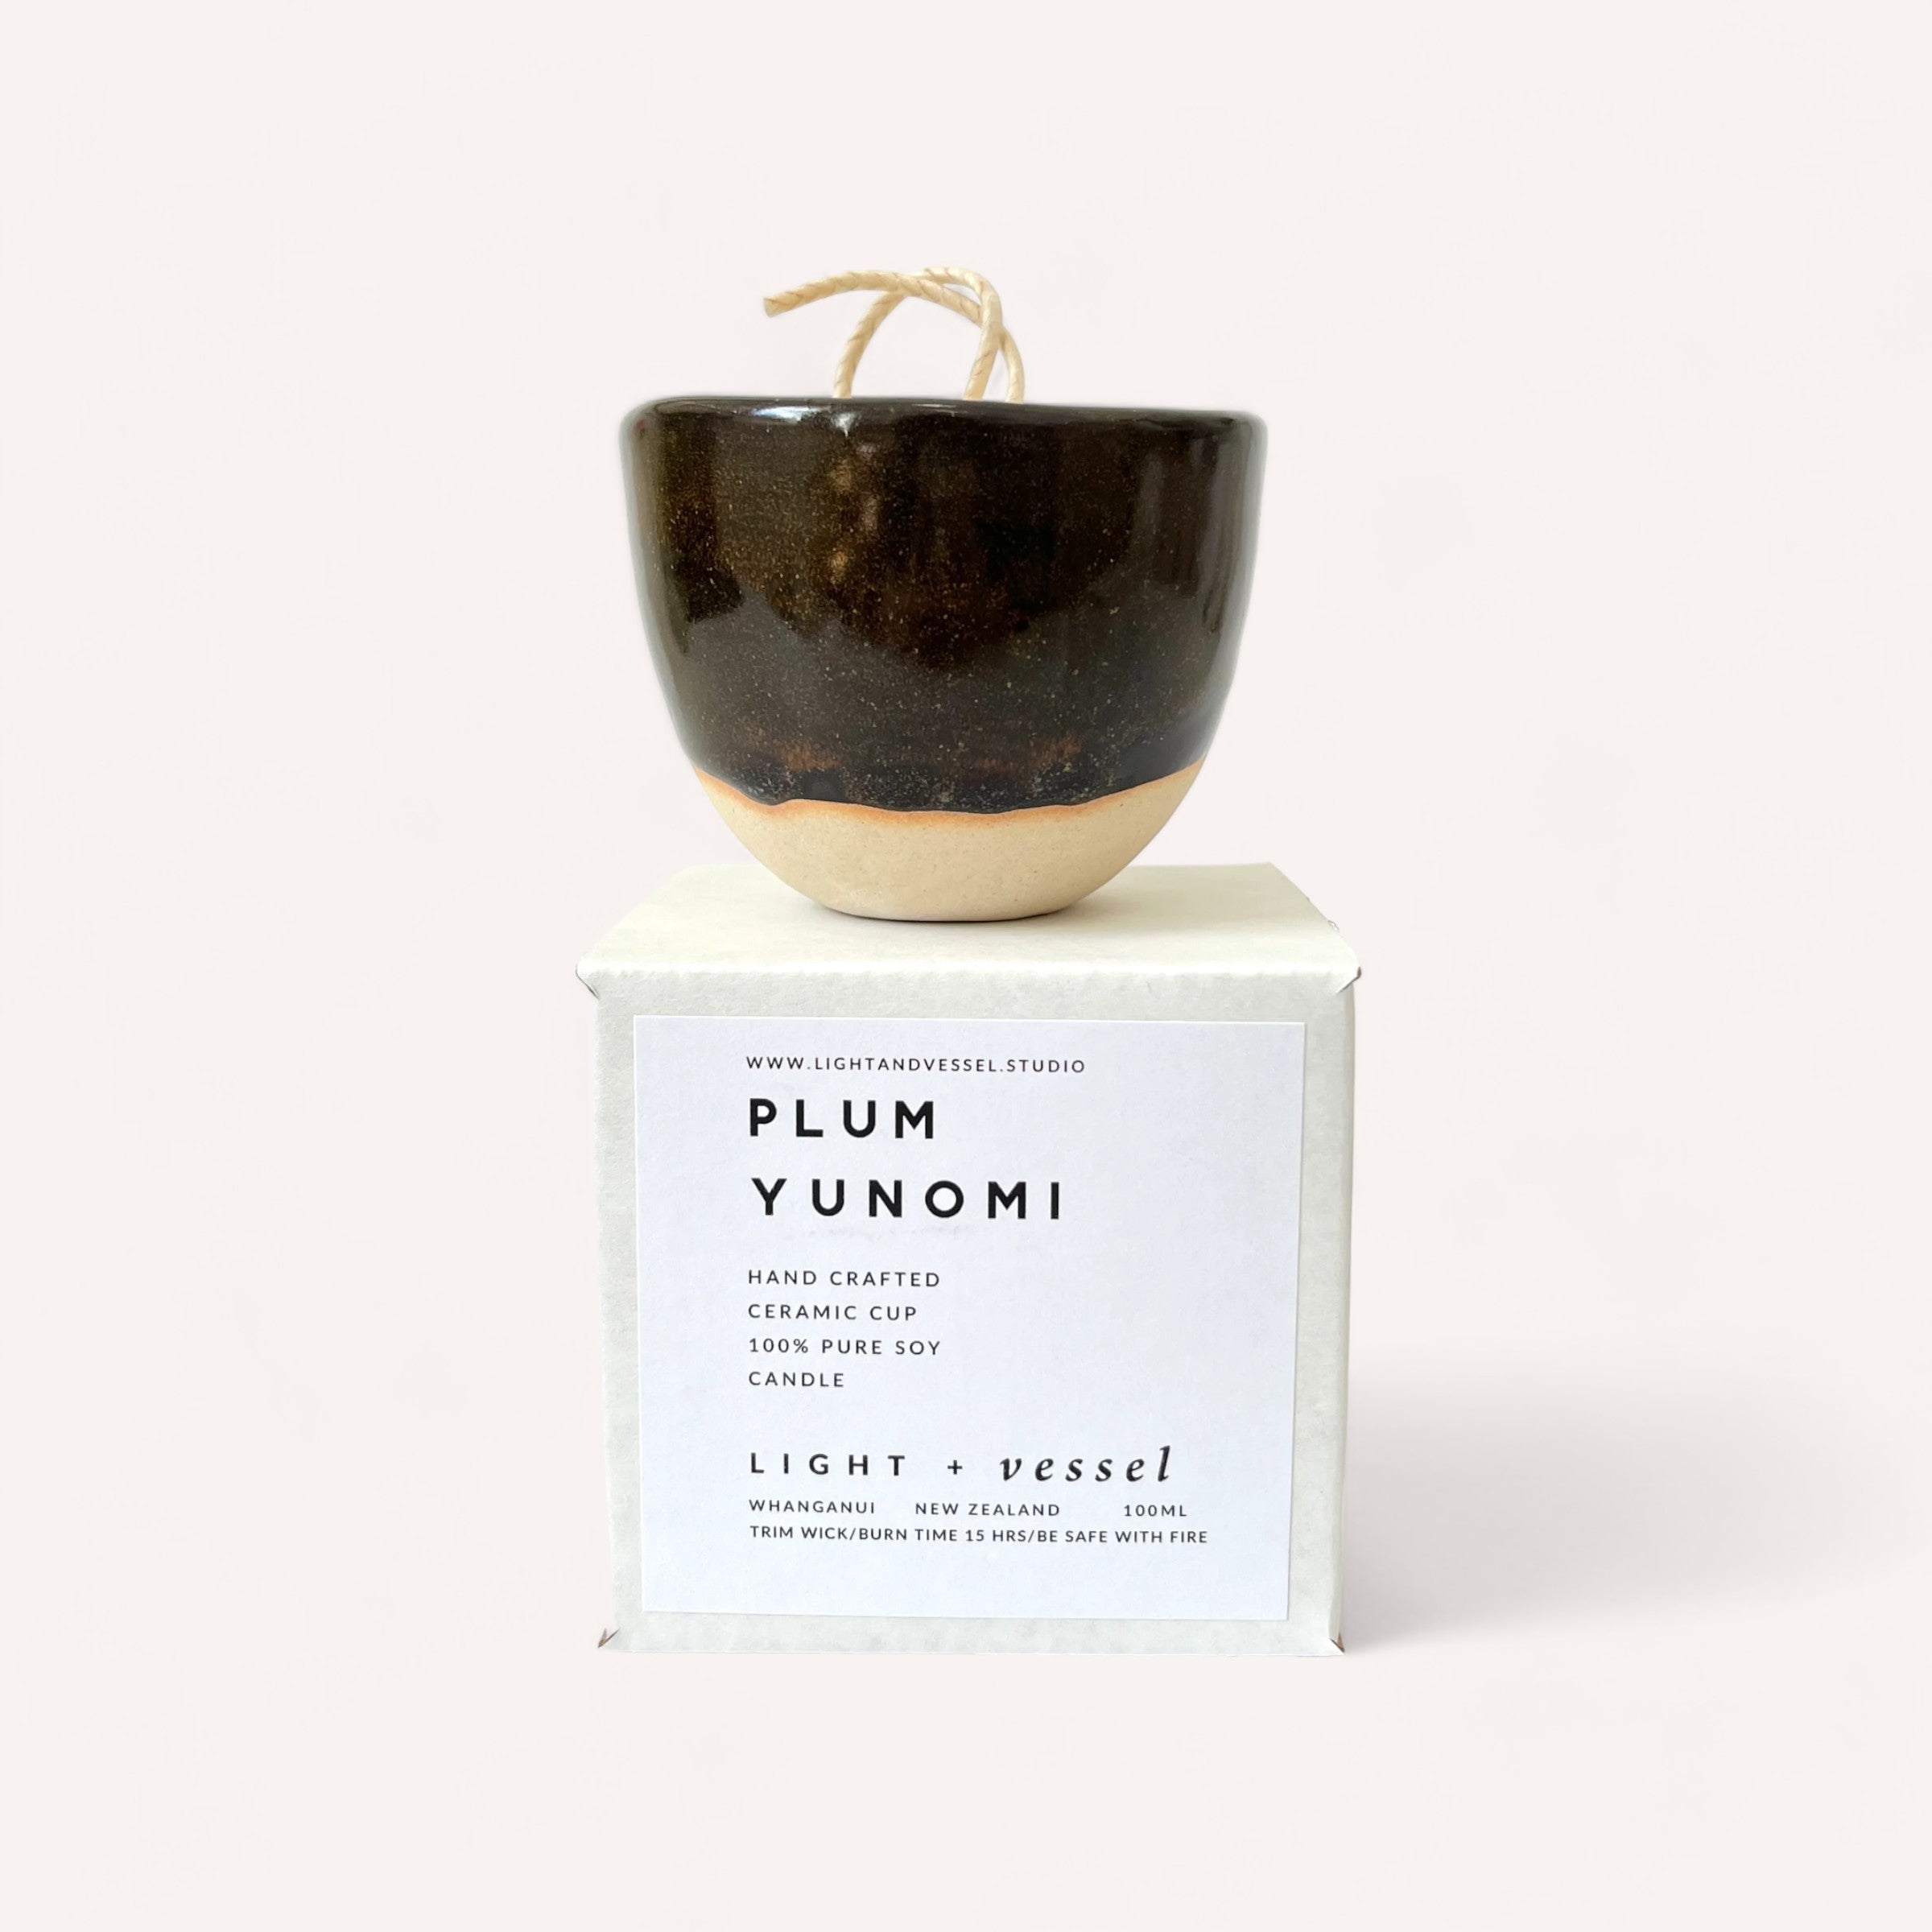 Handcrafted Plum Candle by Light + Vessel soy candle with natural fragrance oils displayed on minimalist packaging with a descriptive label.